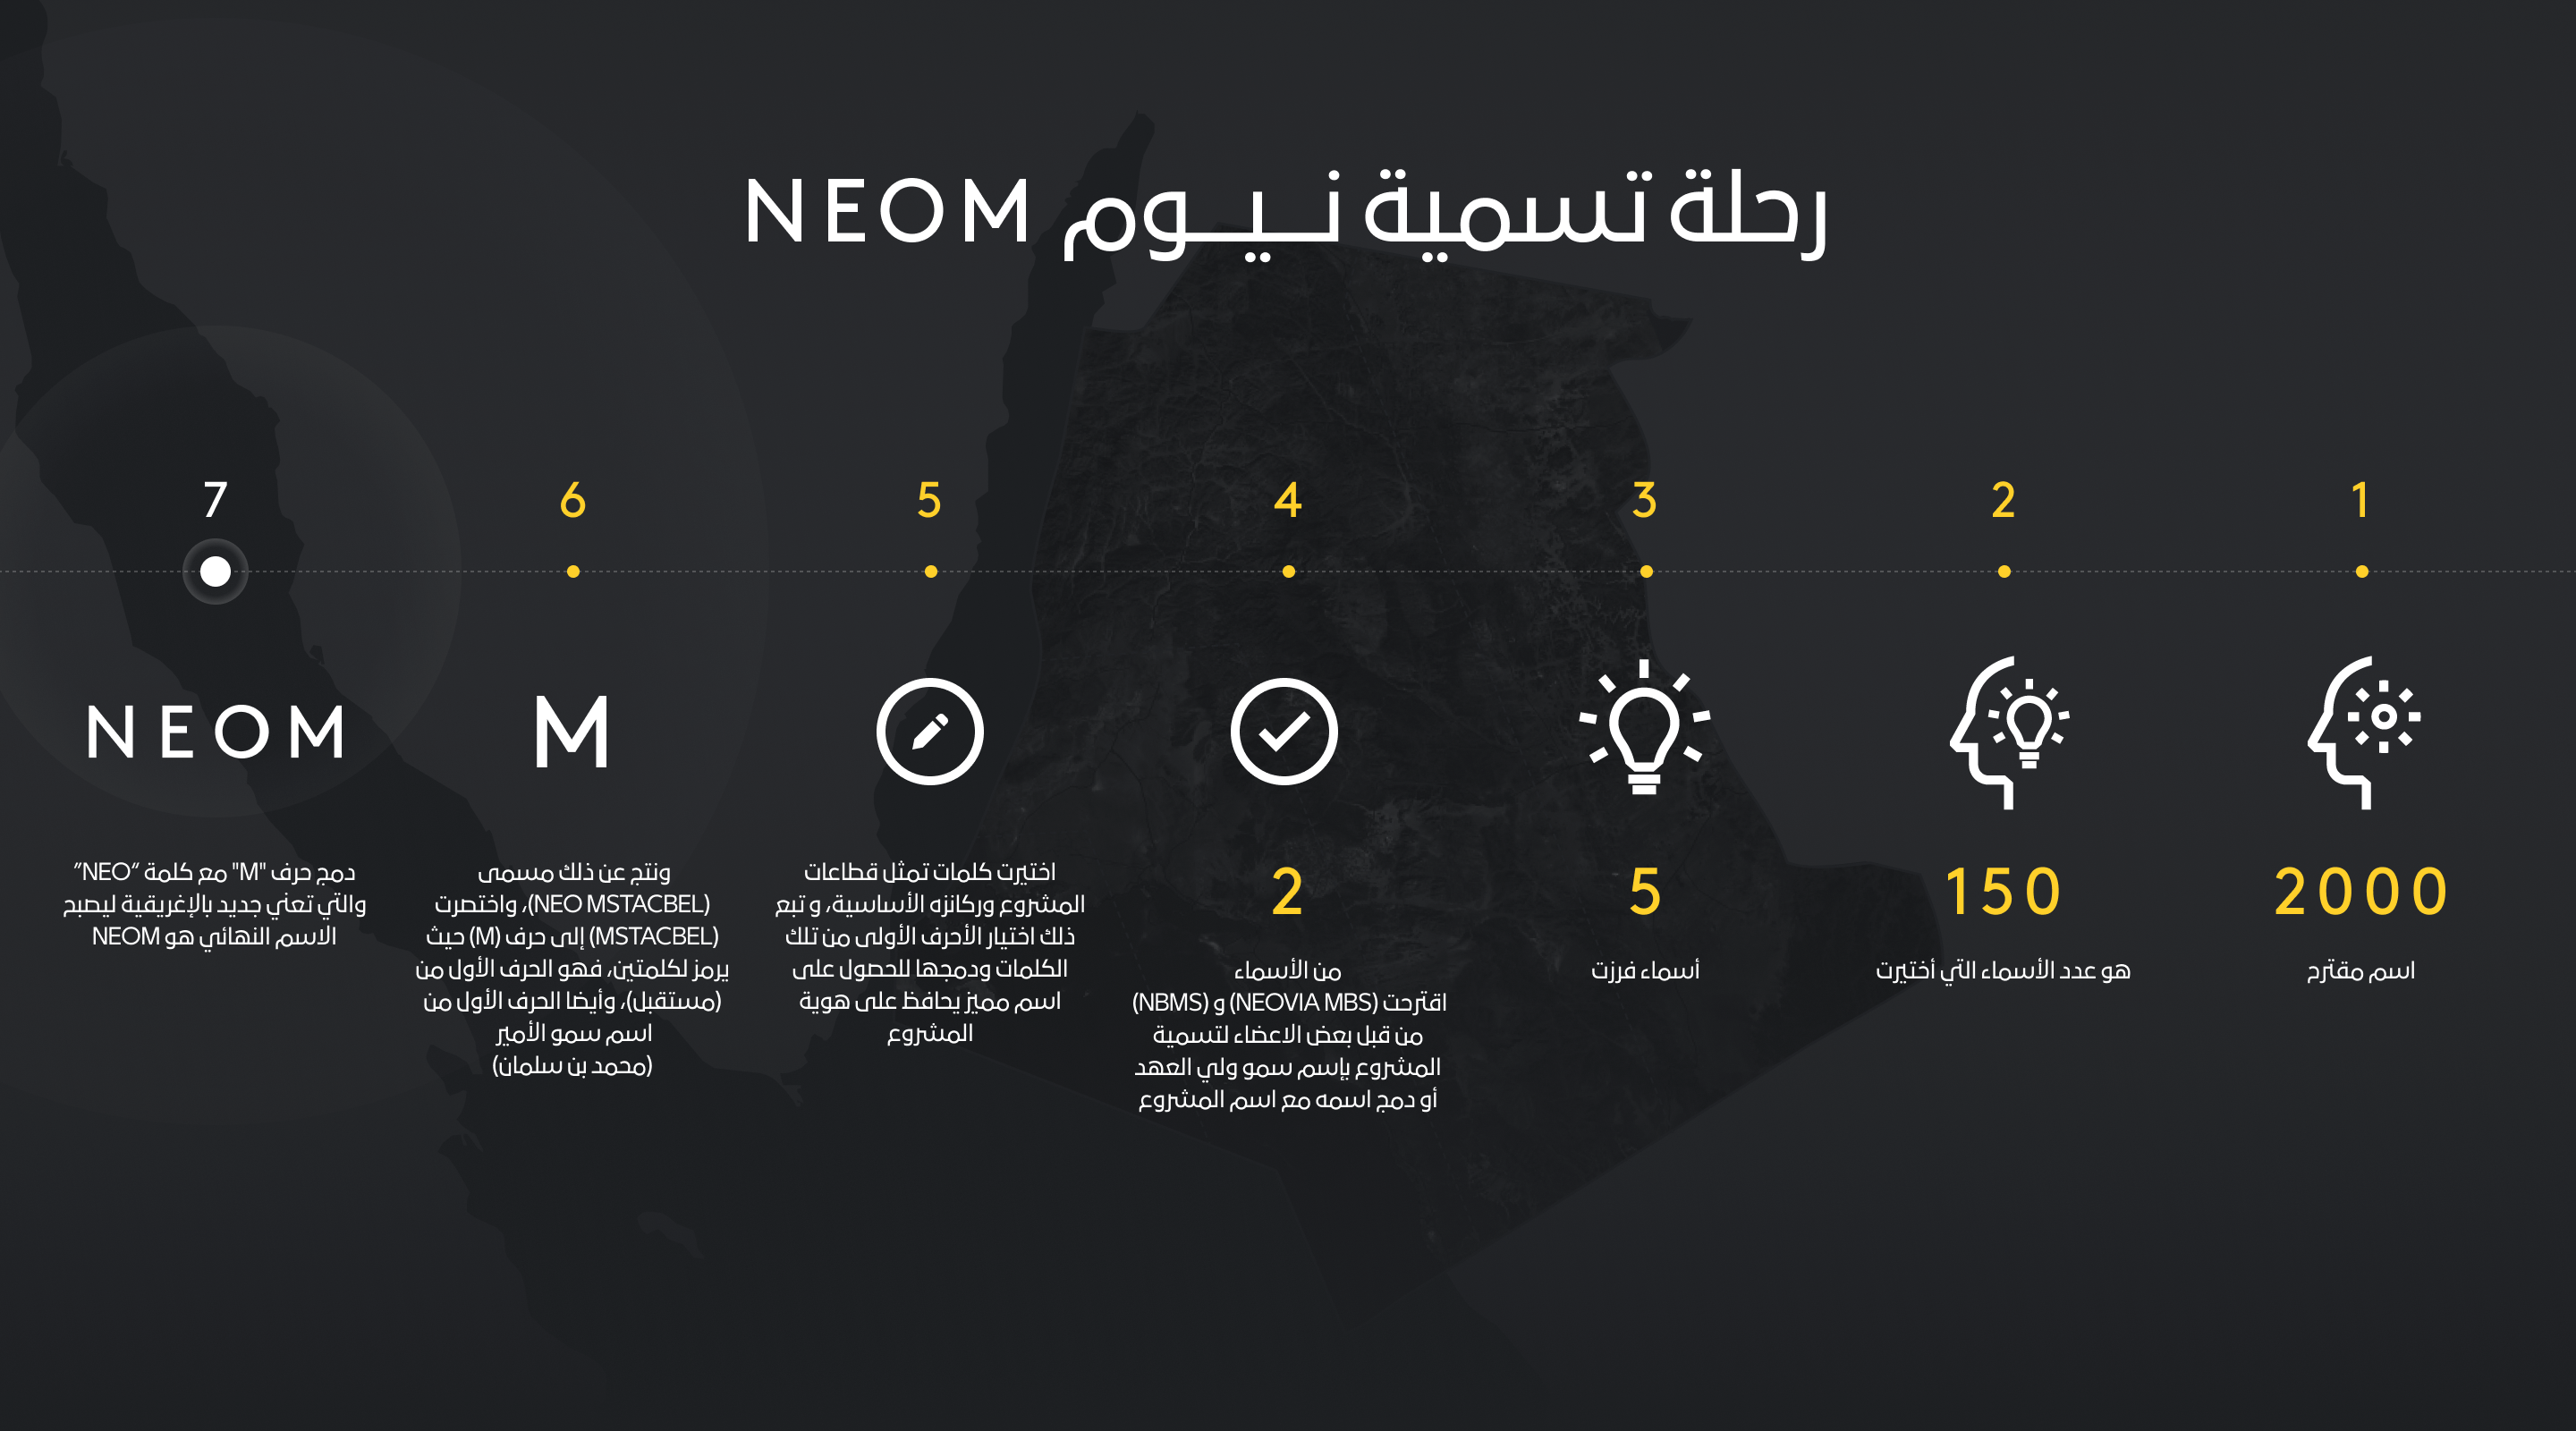 Neom launches the Line